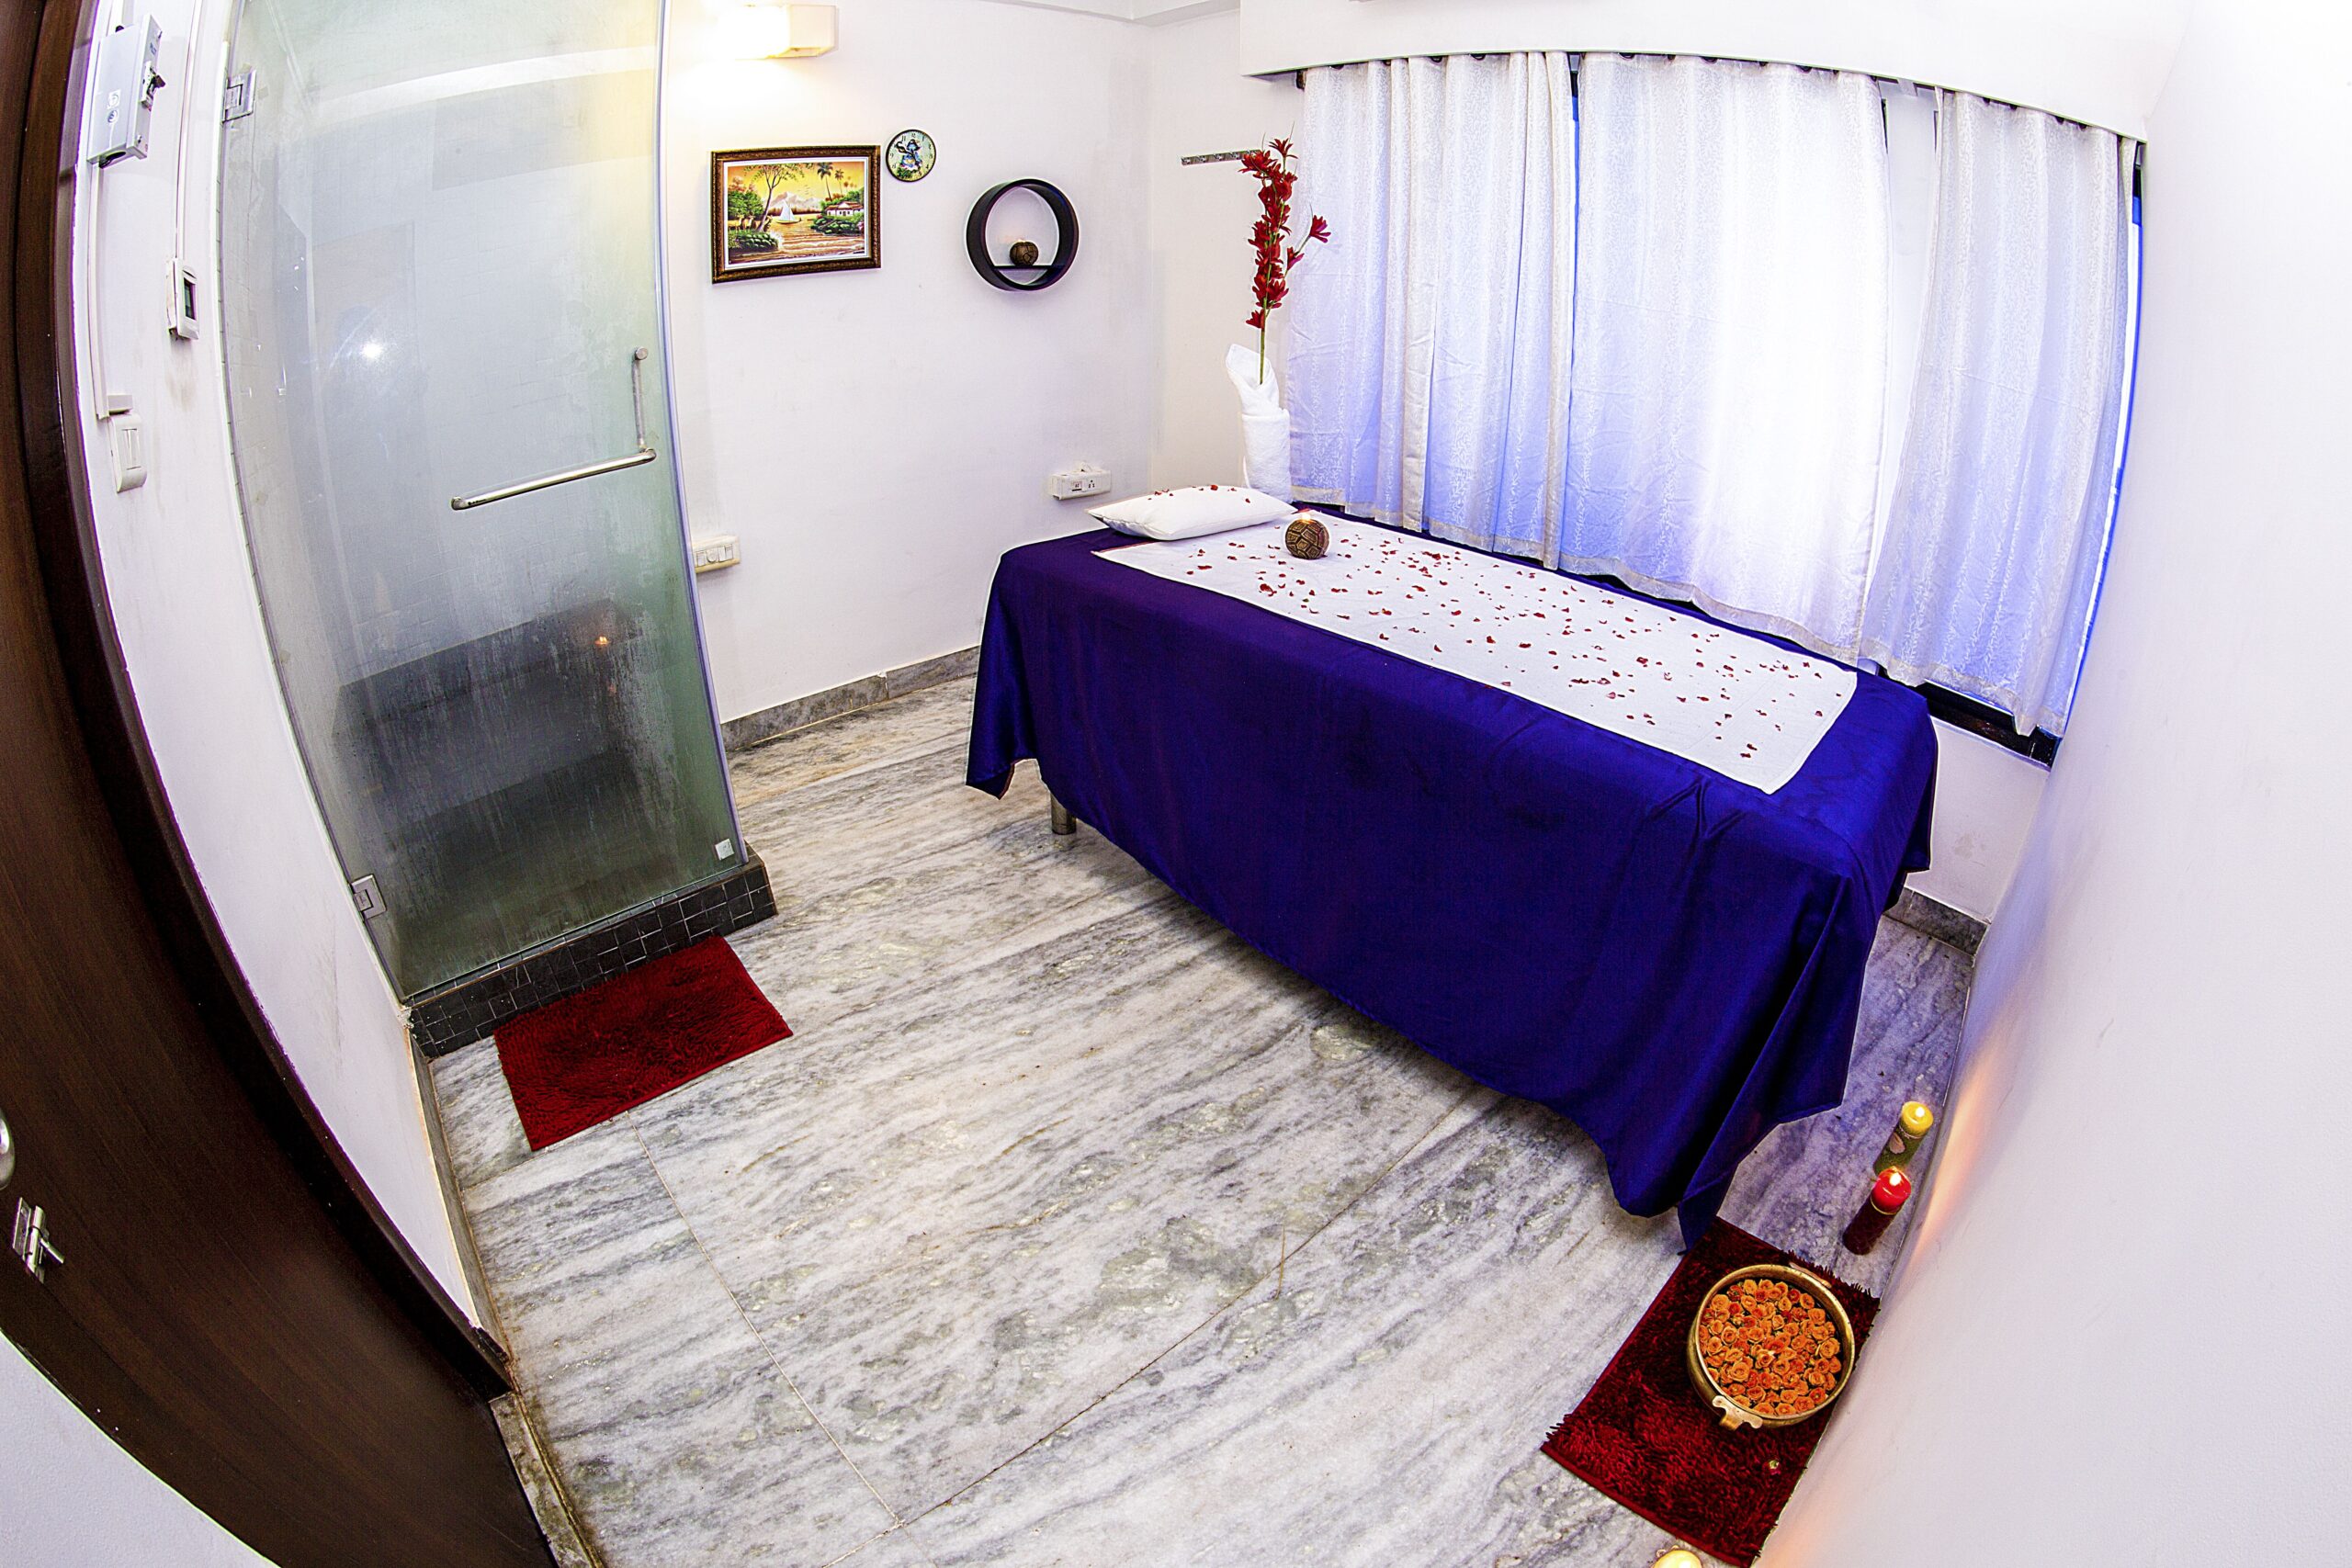 There was a glass cabin in a corner of the room, two lighted candles on the floor, a water container with flower petals in it, and a lamp. The massage table is covered in a blue satin cloth along with candles and flower petals and has a white pillow and white linens on top.